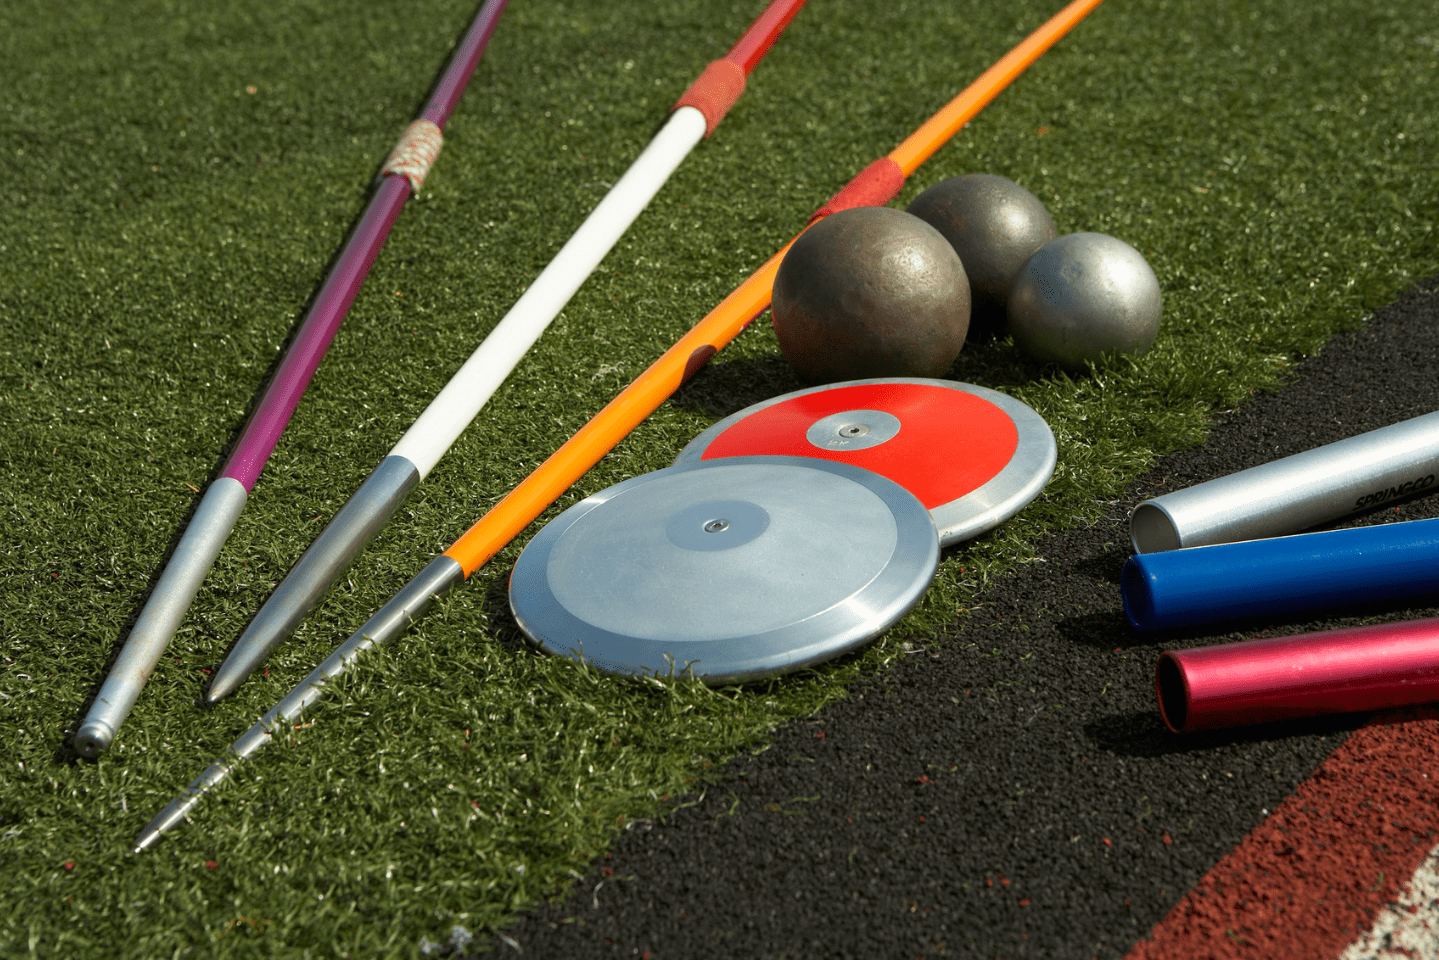 Track and field items on a grassy lawn. 